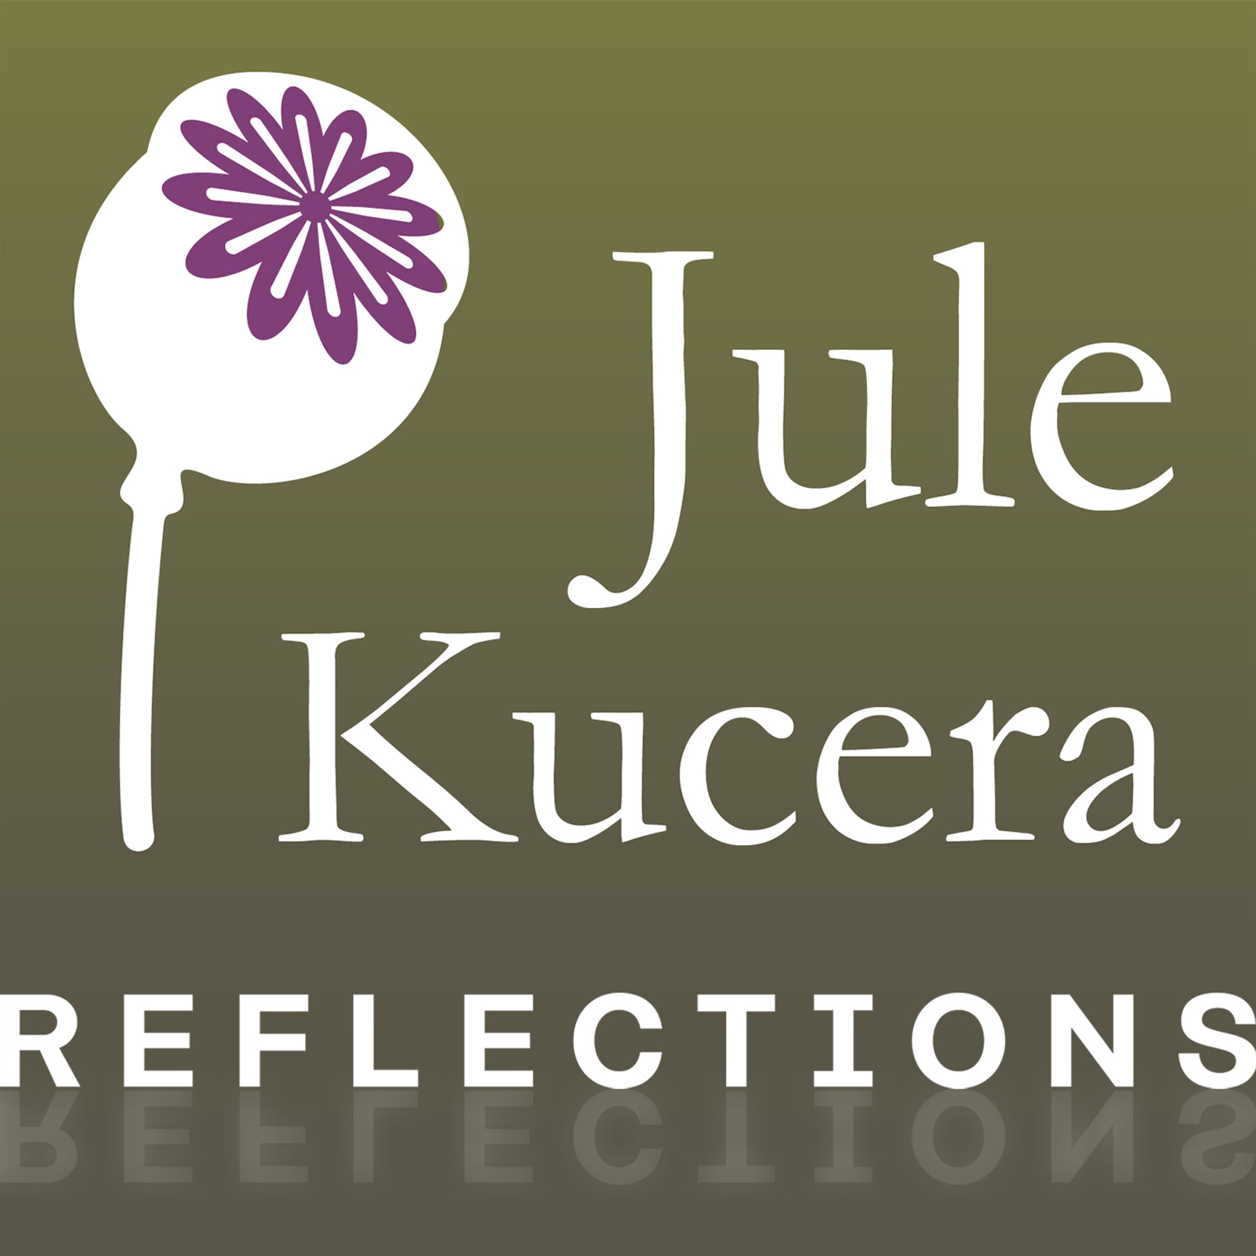 Podcast cover art for Jule Kucera: Reflections, designed by Hernán Braberman, with the word 'Reflections' making reflection